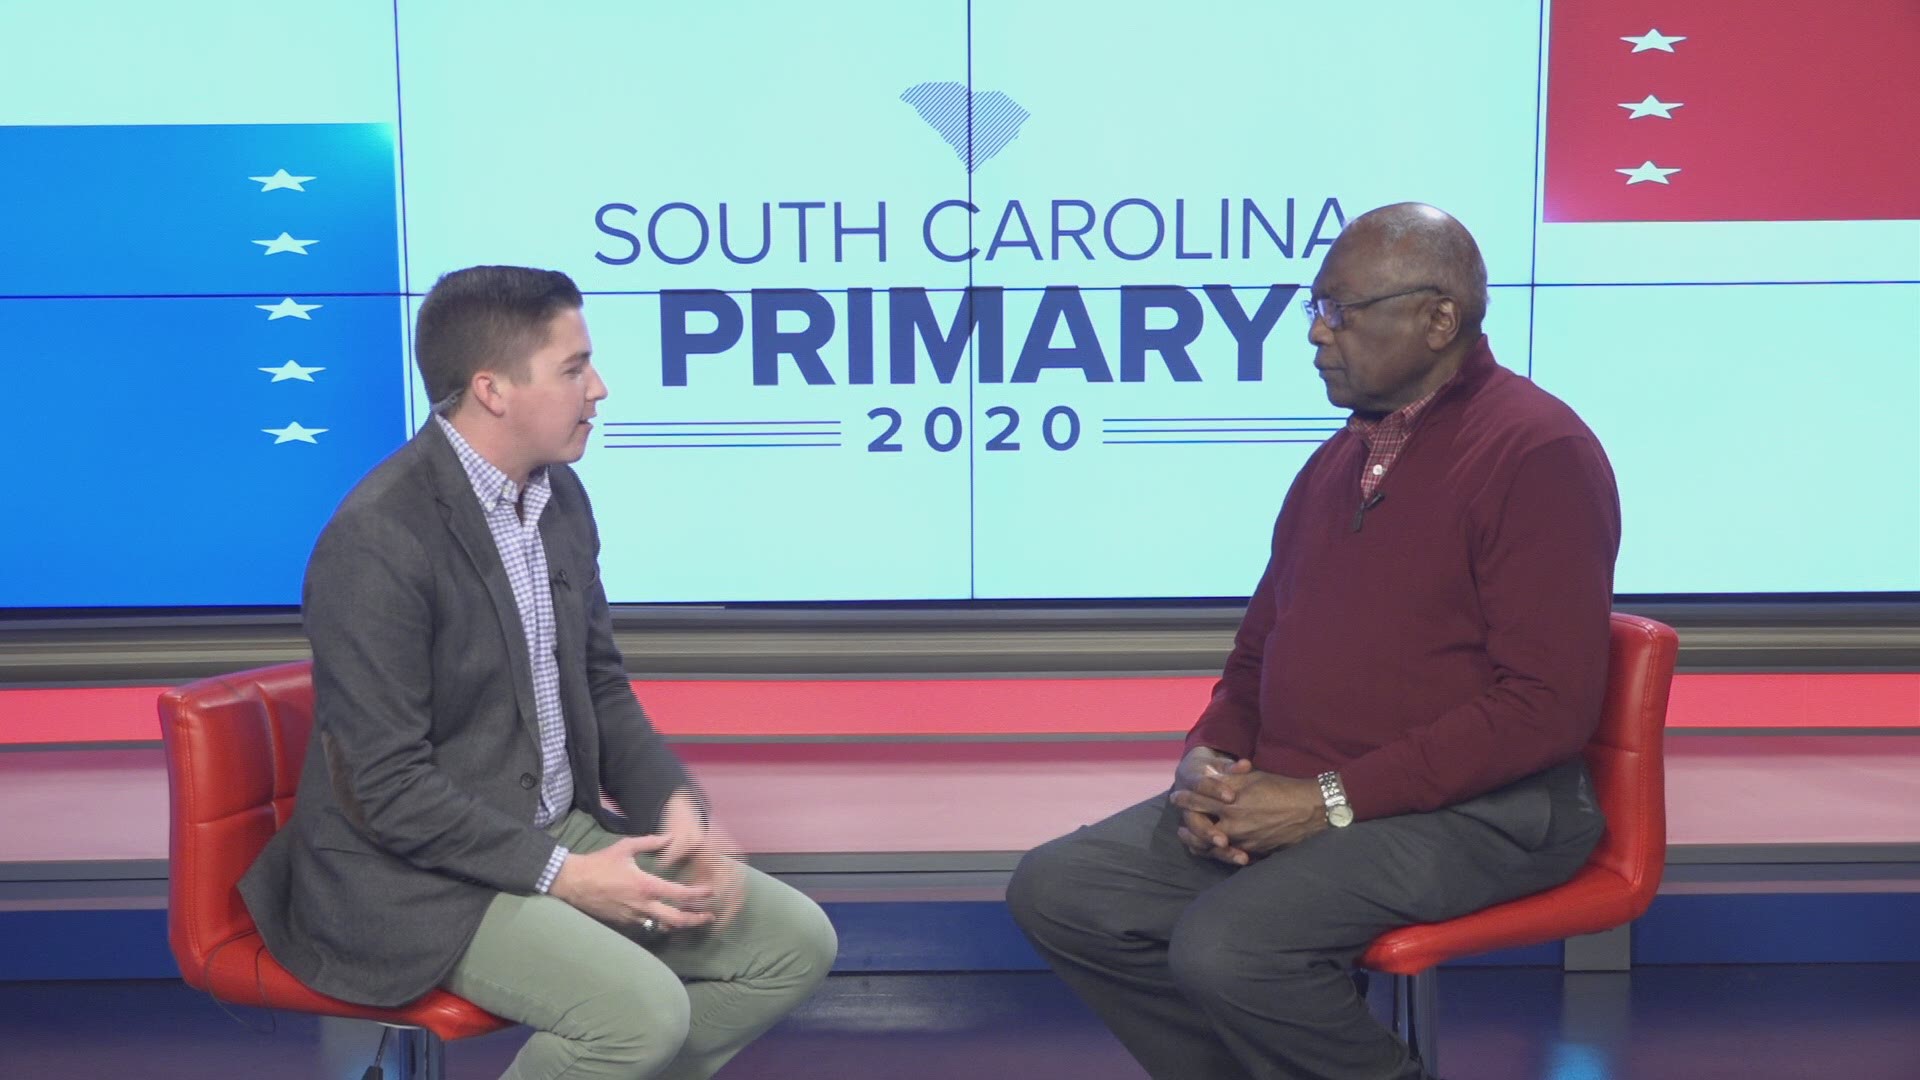 Congressman Jim Clyburn stopped by WLTX to discuss the primary and why he endorsed Joe Biden.